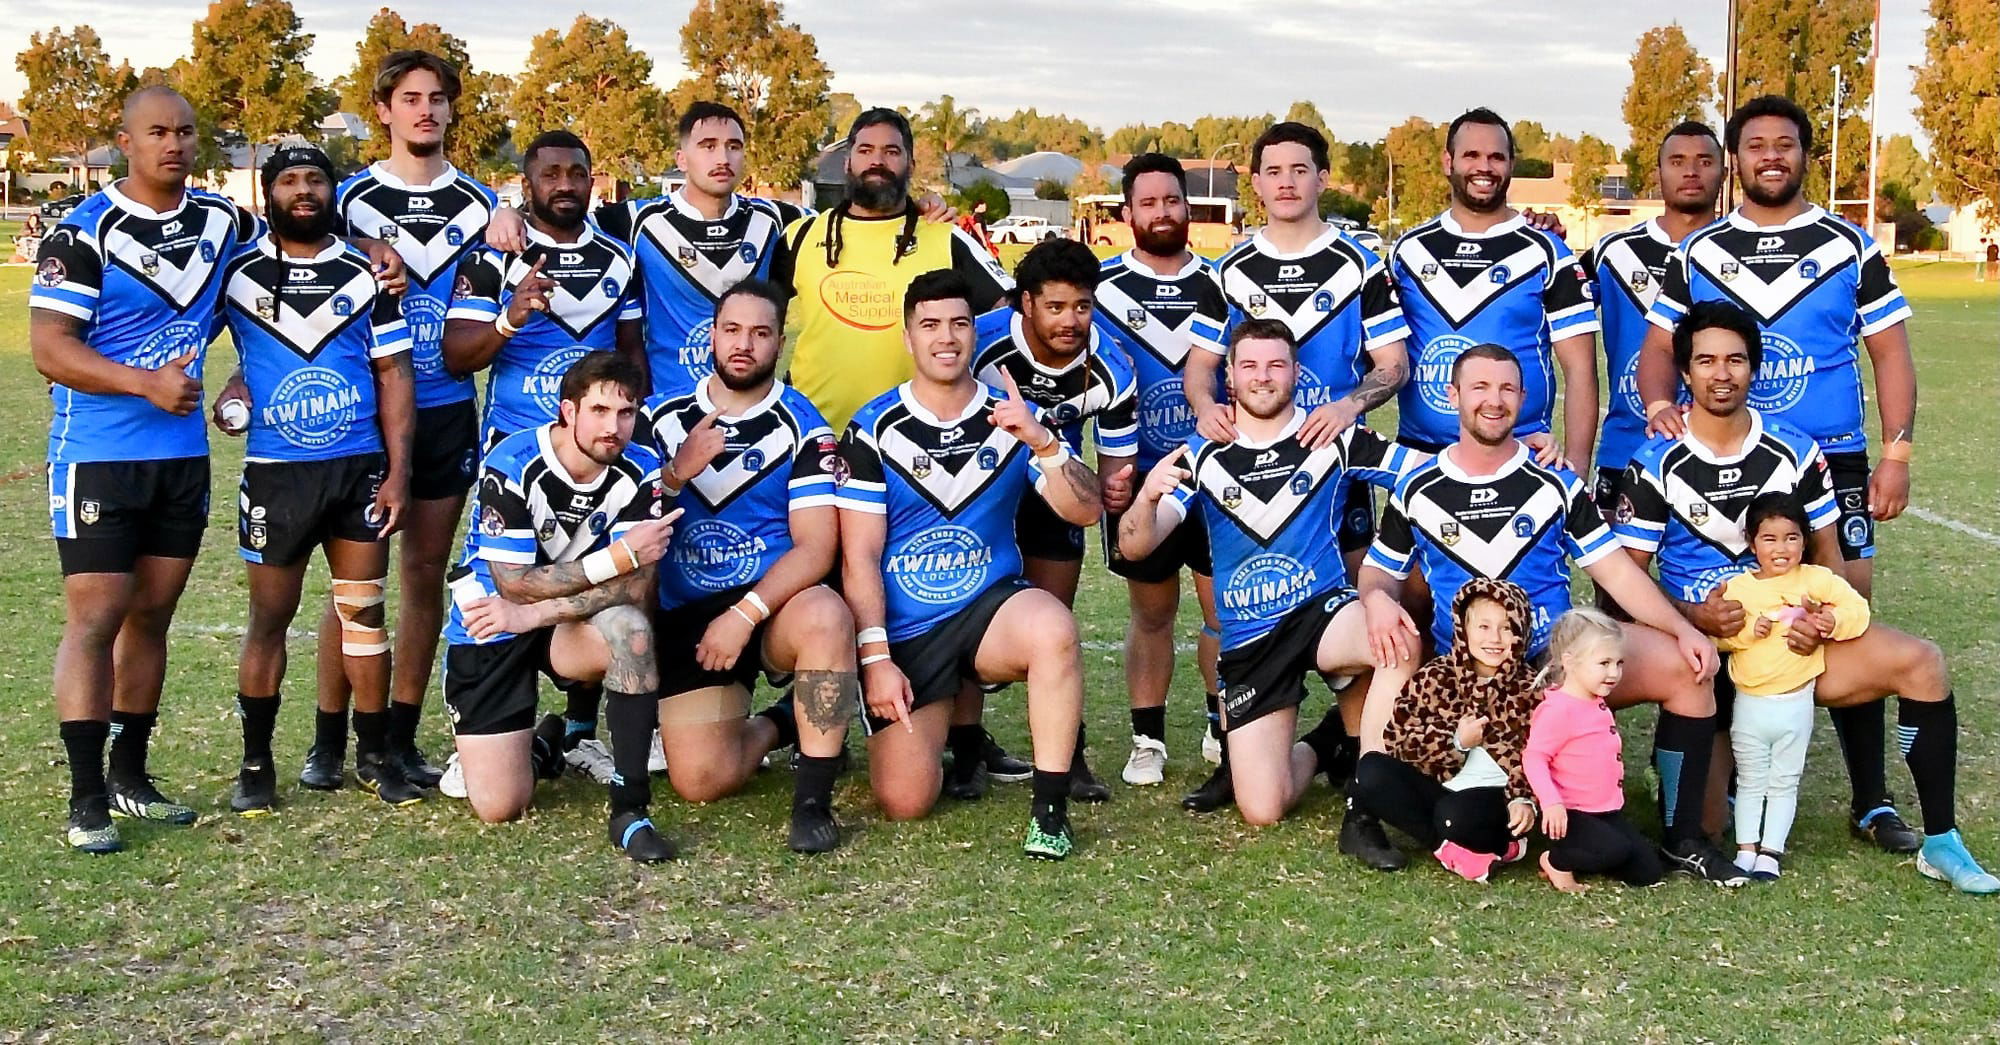 RECORD BREAKING WIN KEEPS SHARKS ON TOP